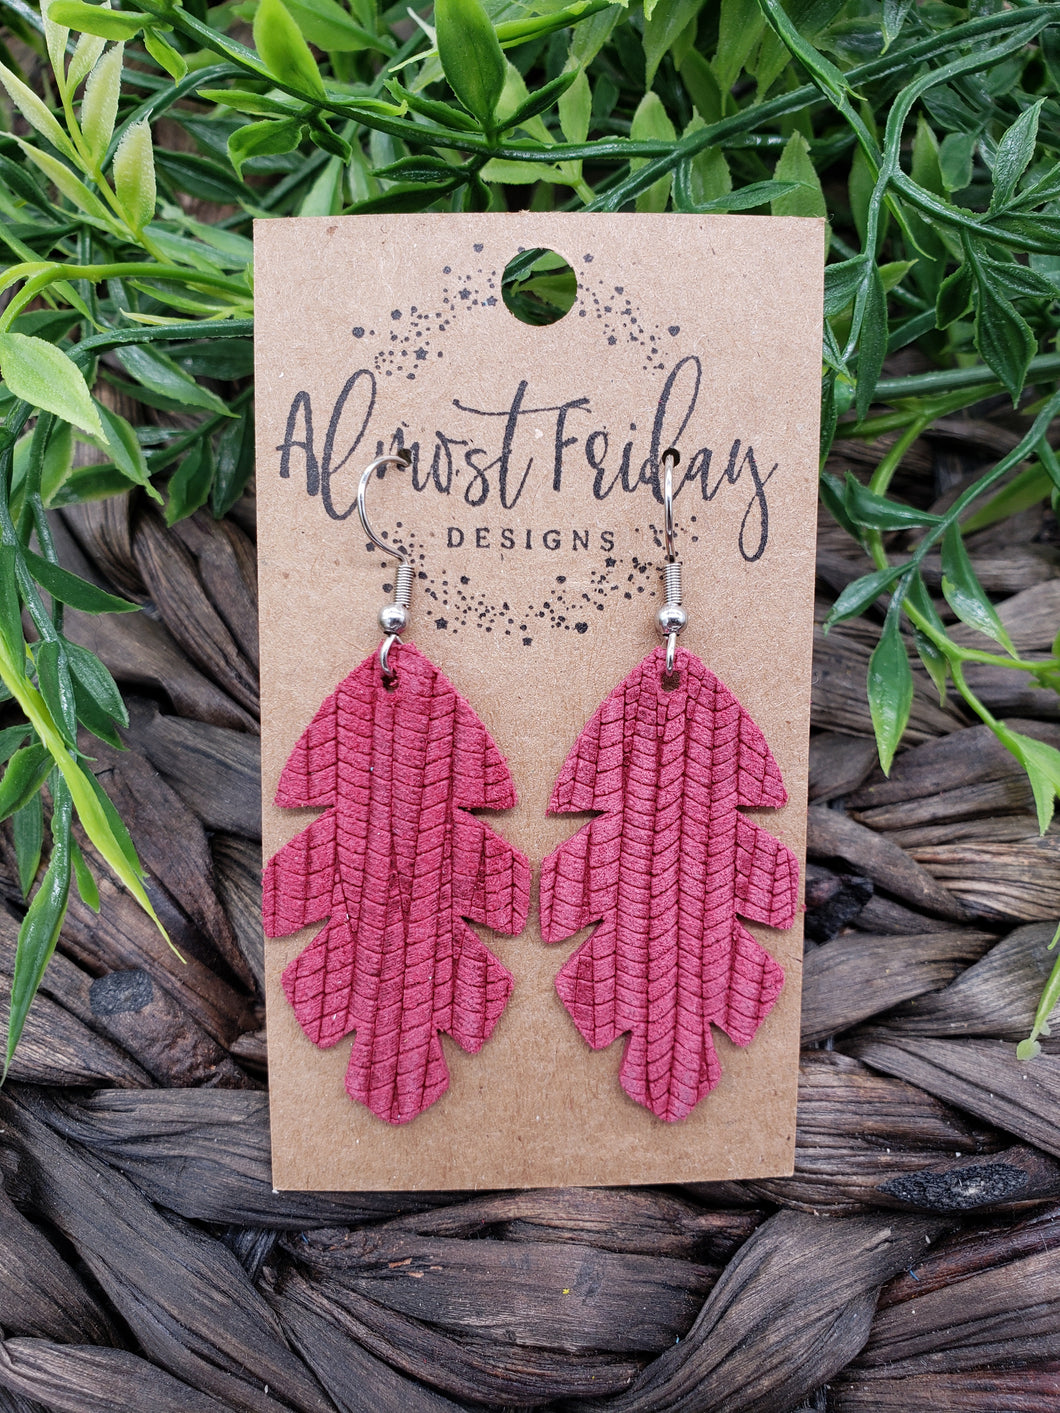 Genuine Leather Earrings - Red - Textured - Leaf - Statement Earrings - Fall Leaf - Fall Earrings - Maple Leaf - Rust - Textured Leather